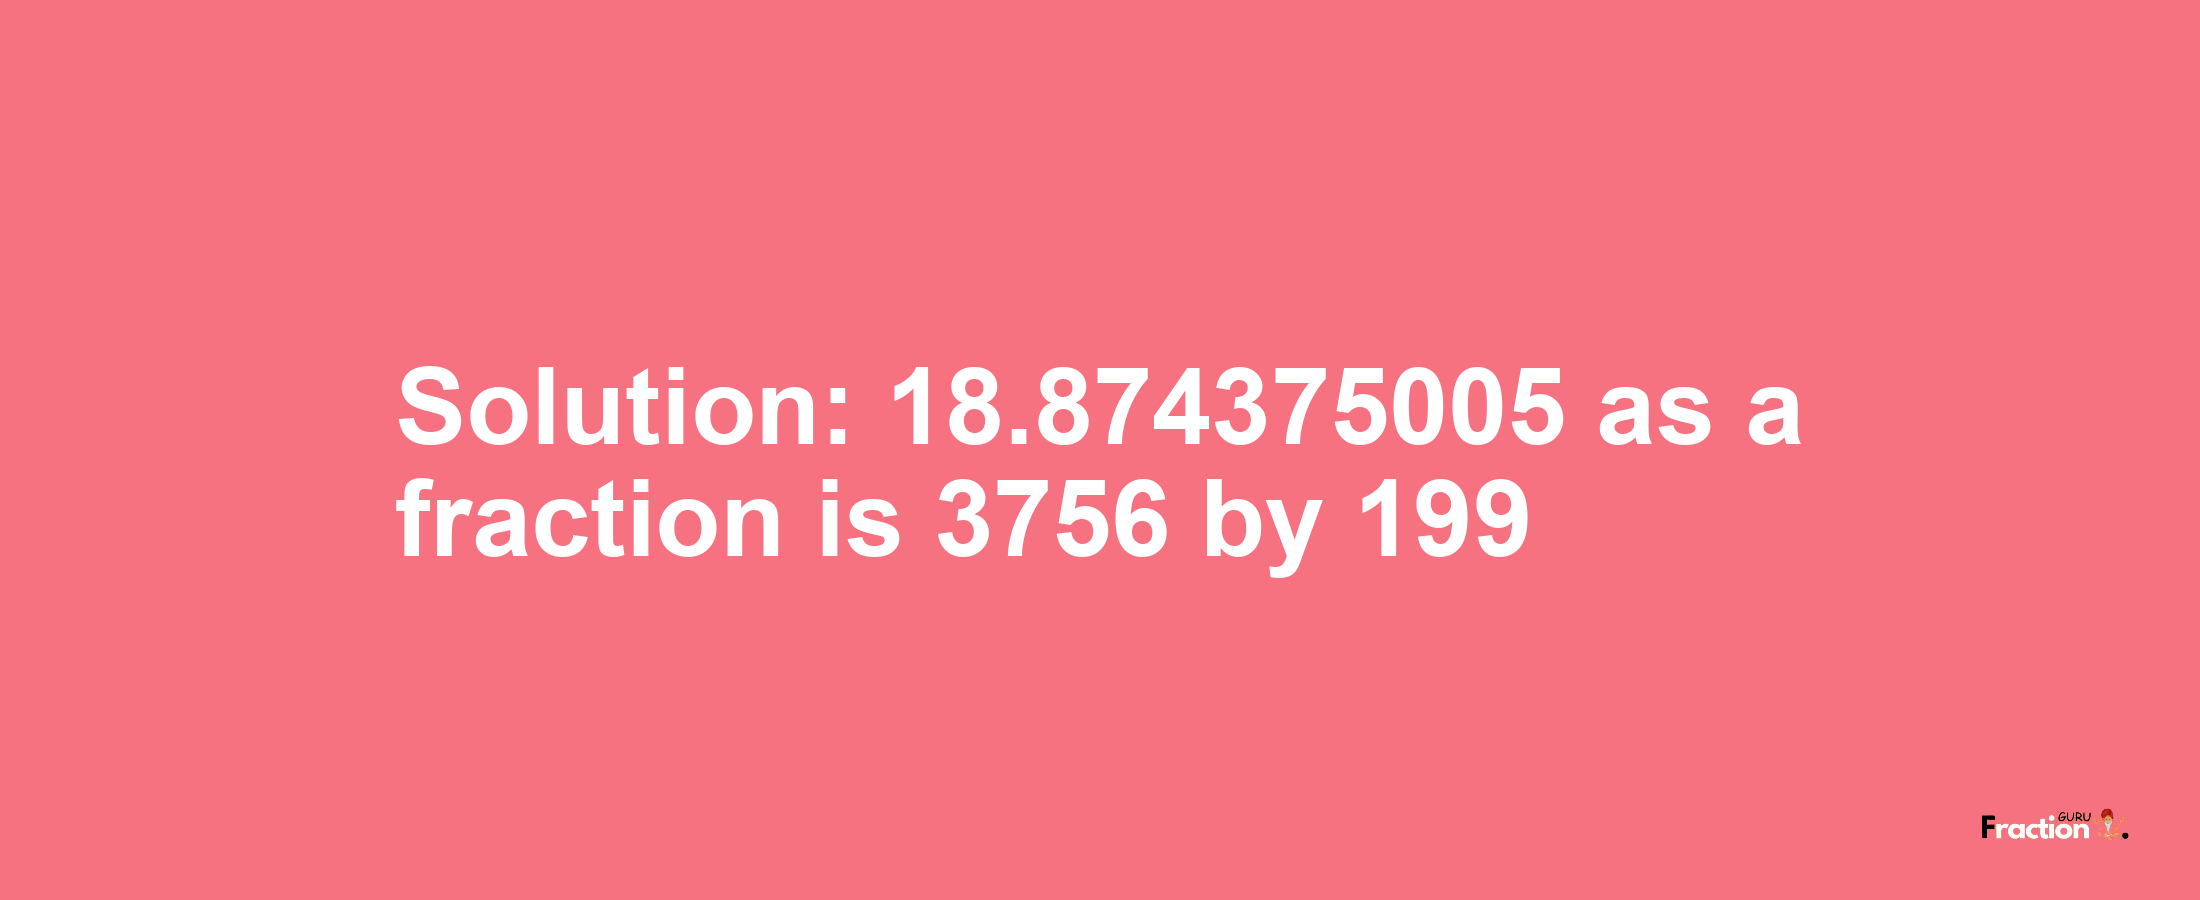 Solution:18.874375005 as a fraction is 3756/199